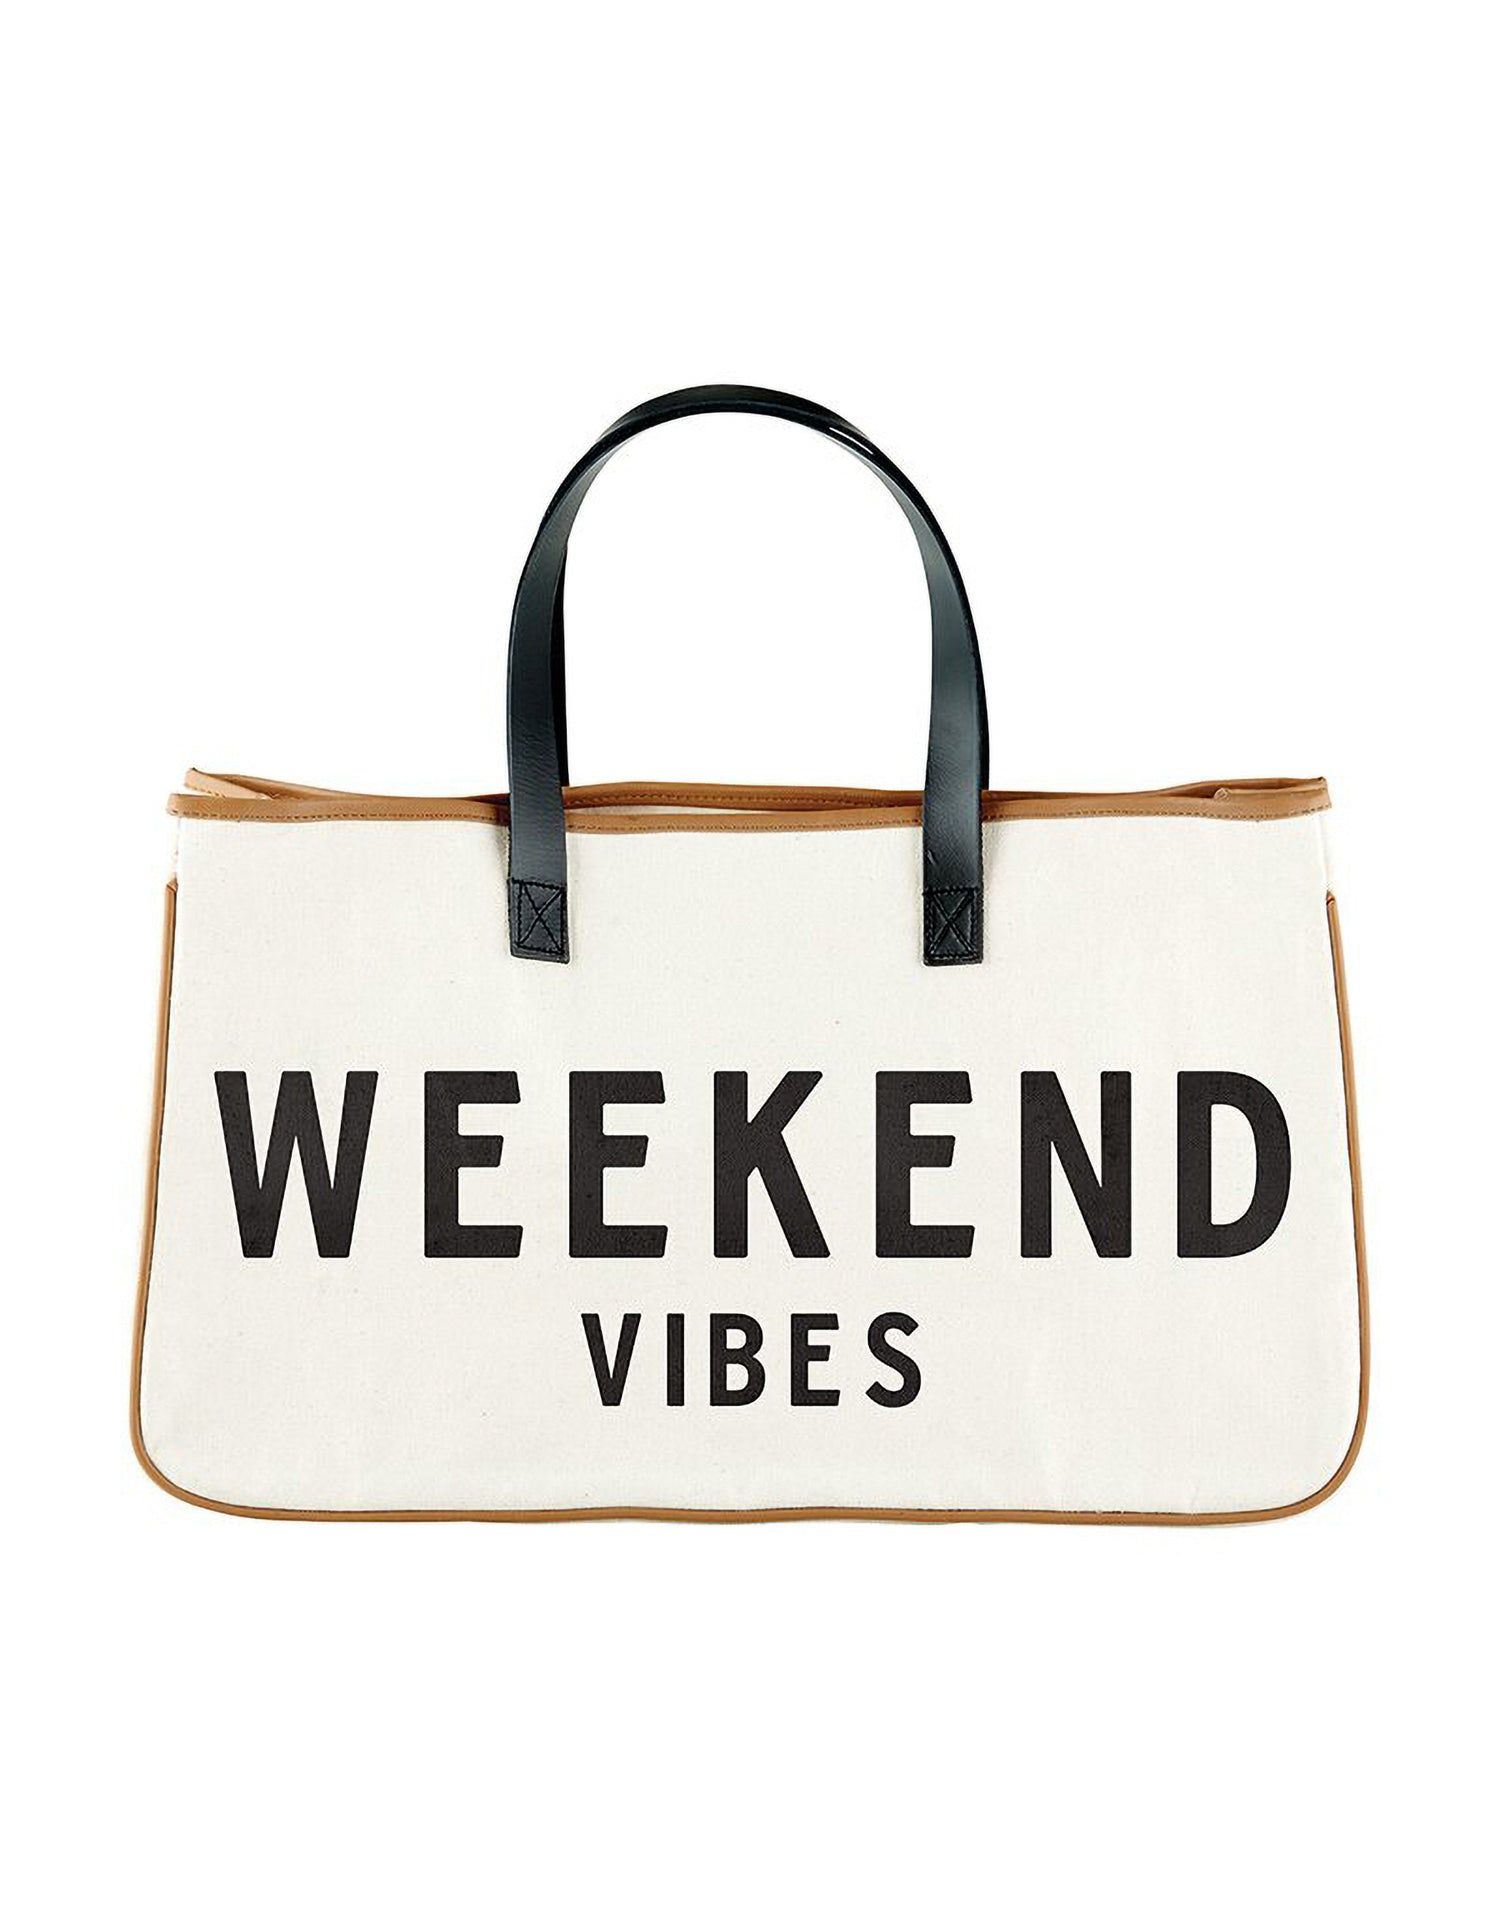 Santa Barbara Design Studio's Weekend Vibes Tote in Canvas - Product Front View